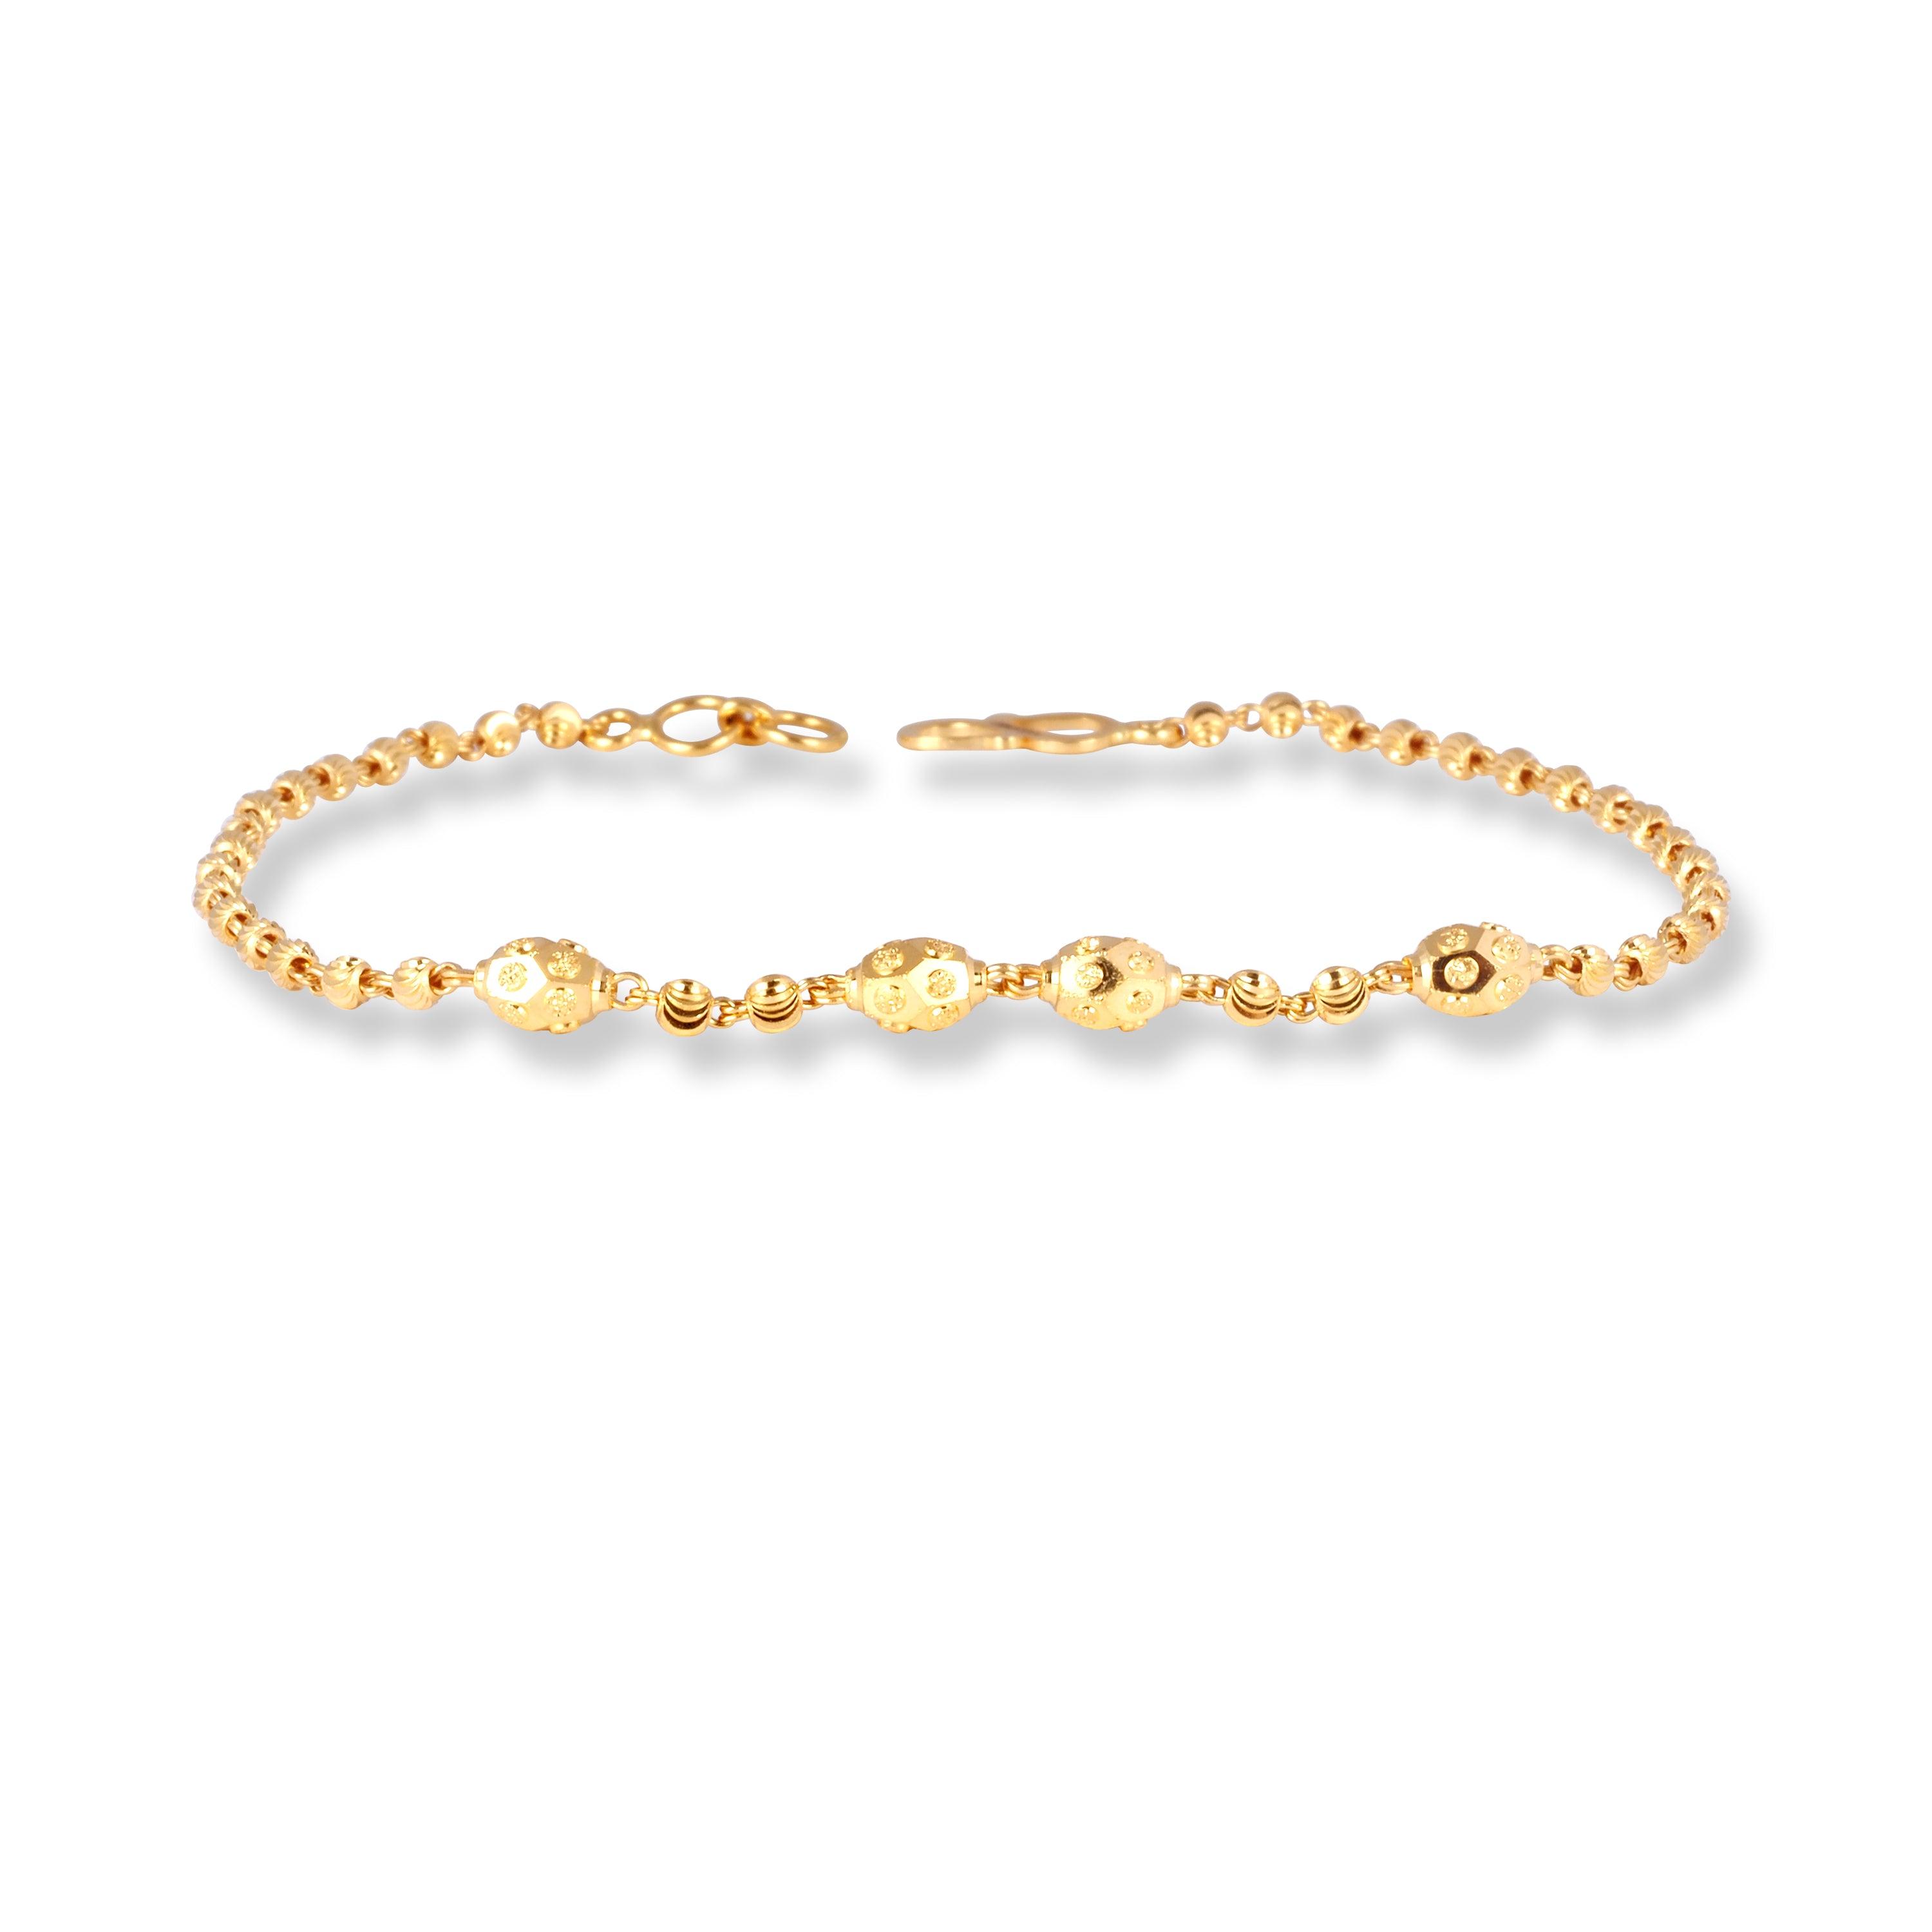 22ct Gold Ladies Bracelet with Oval Beads & S Clasp LBR-7155 - Minar Jewellers